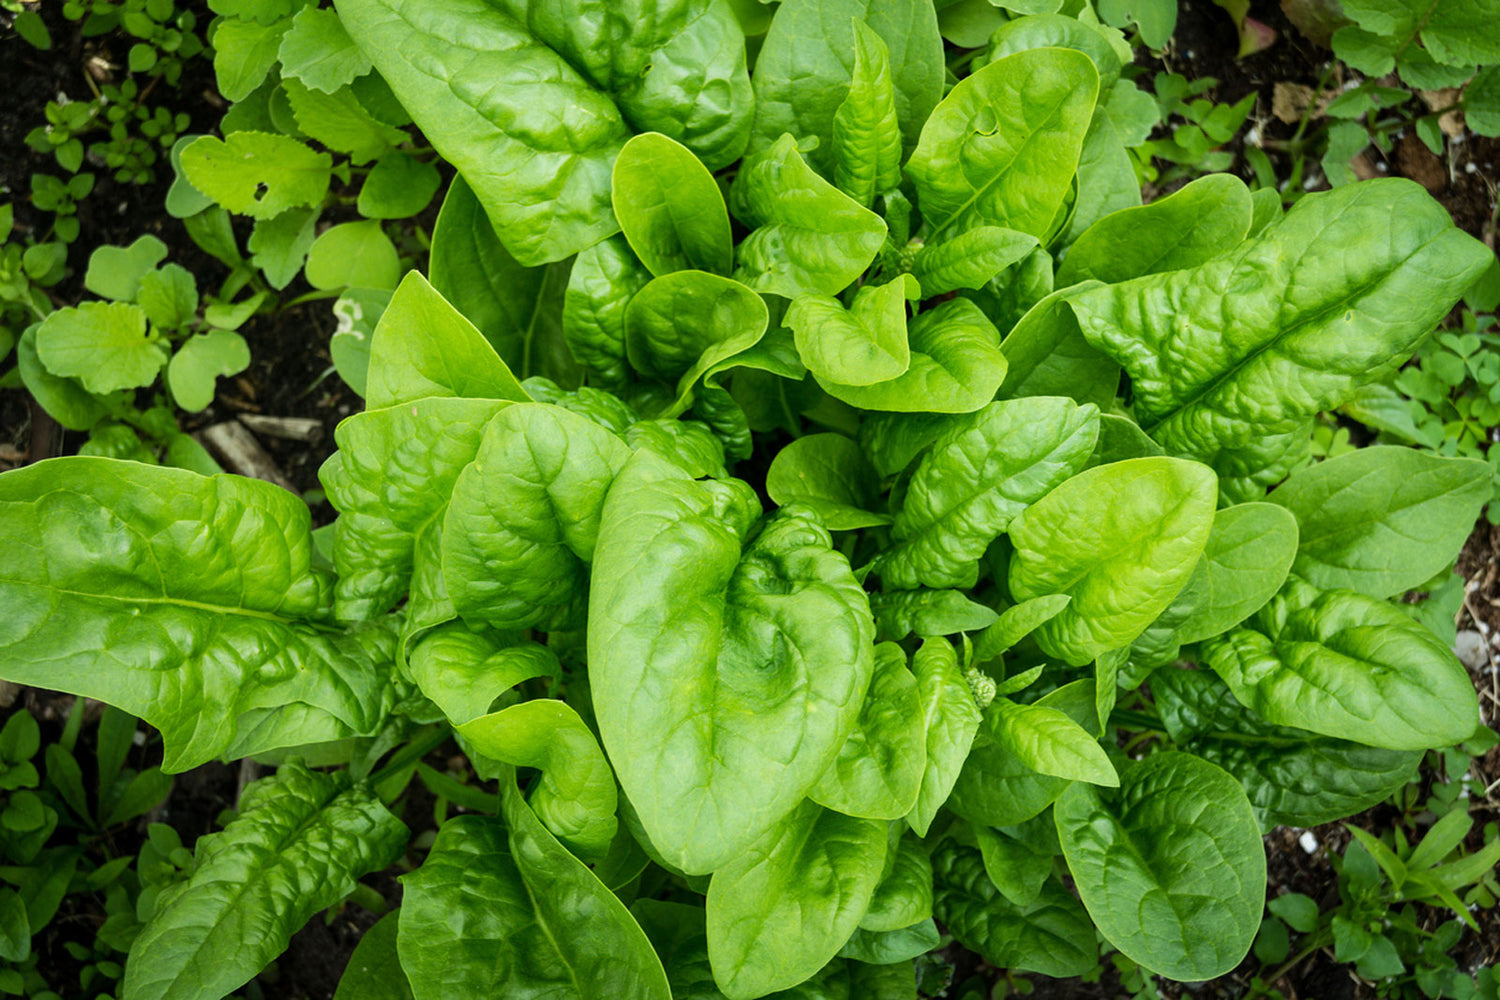 Spinach - A photo of spinach leaves growing in a garden bed. The photo shows the deep green, broad, and slightly crinkled leaves of spinach. The leaves are arranged in a rosette shape and have long petioles that extend from the central stem. The soil in the garden bed is dark and rich, with visible water droplets on the leaves indicating recent watering.